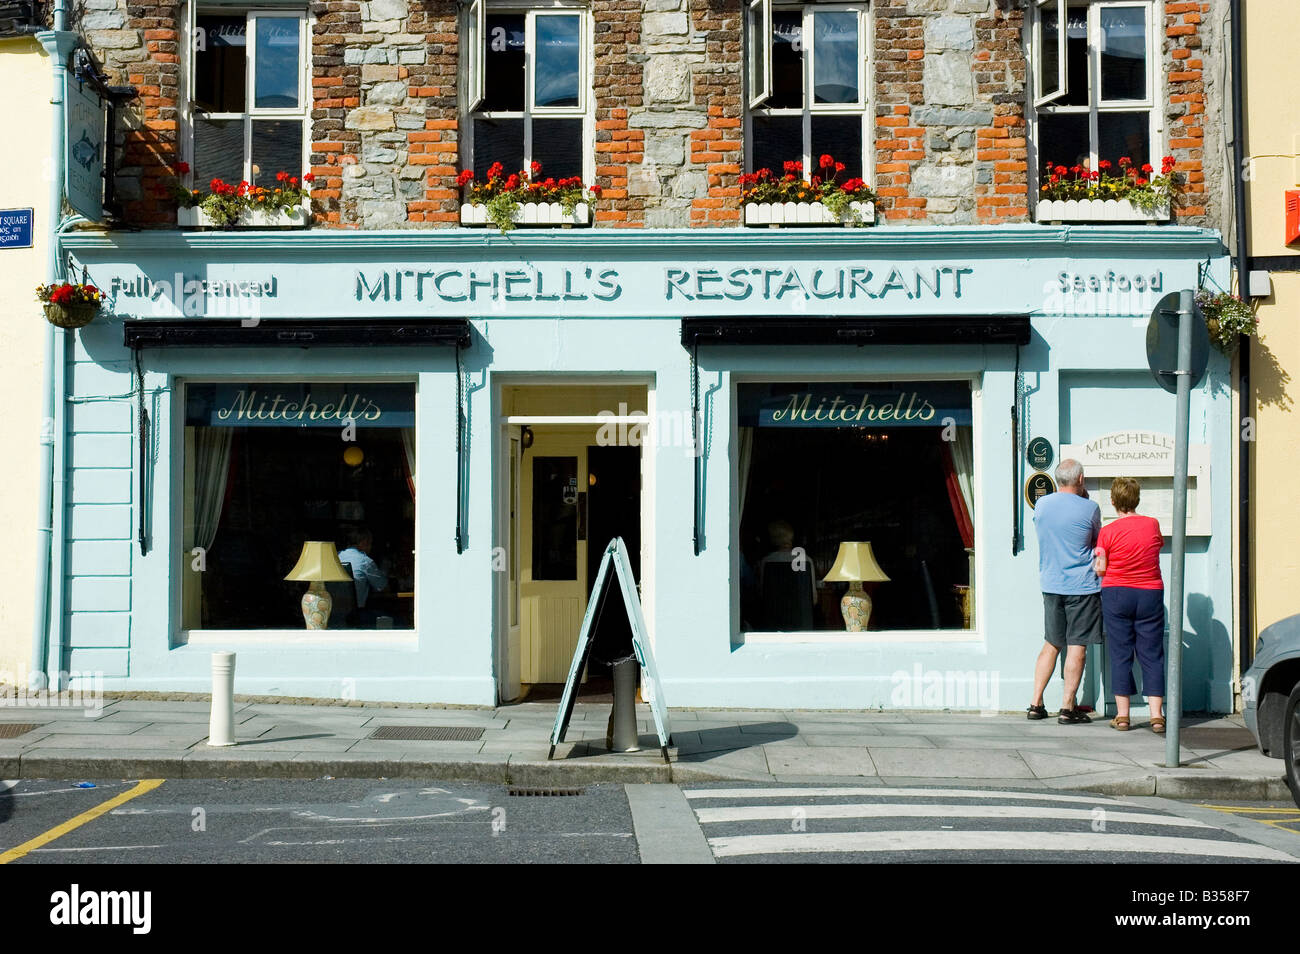 People look at the menu in the window of a restaurant in the town centre of Clifden, Connemara, County Galway, Ireland Stock Photo